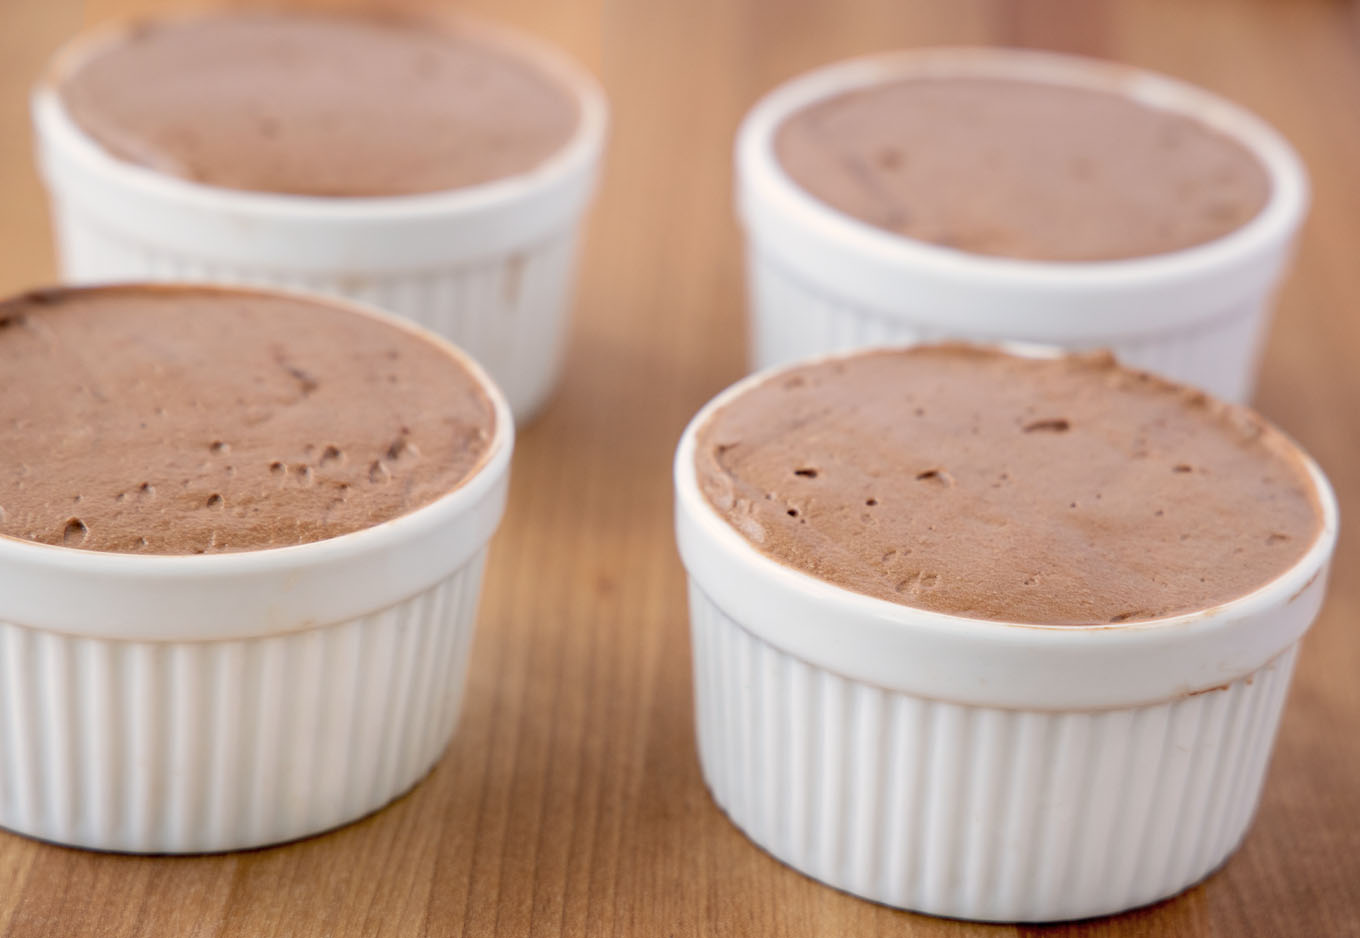 Rich Chocolate Mousse Recipe